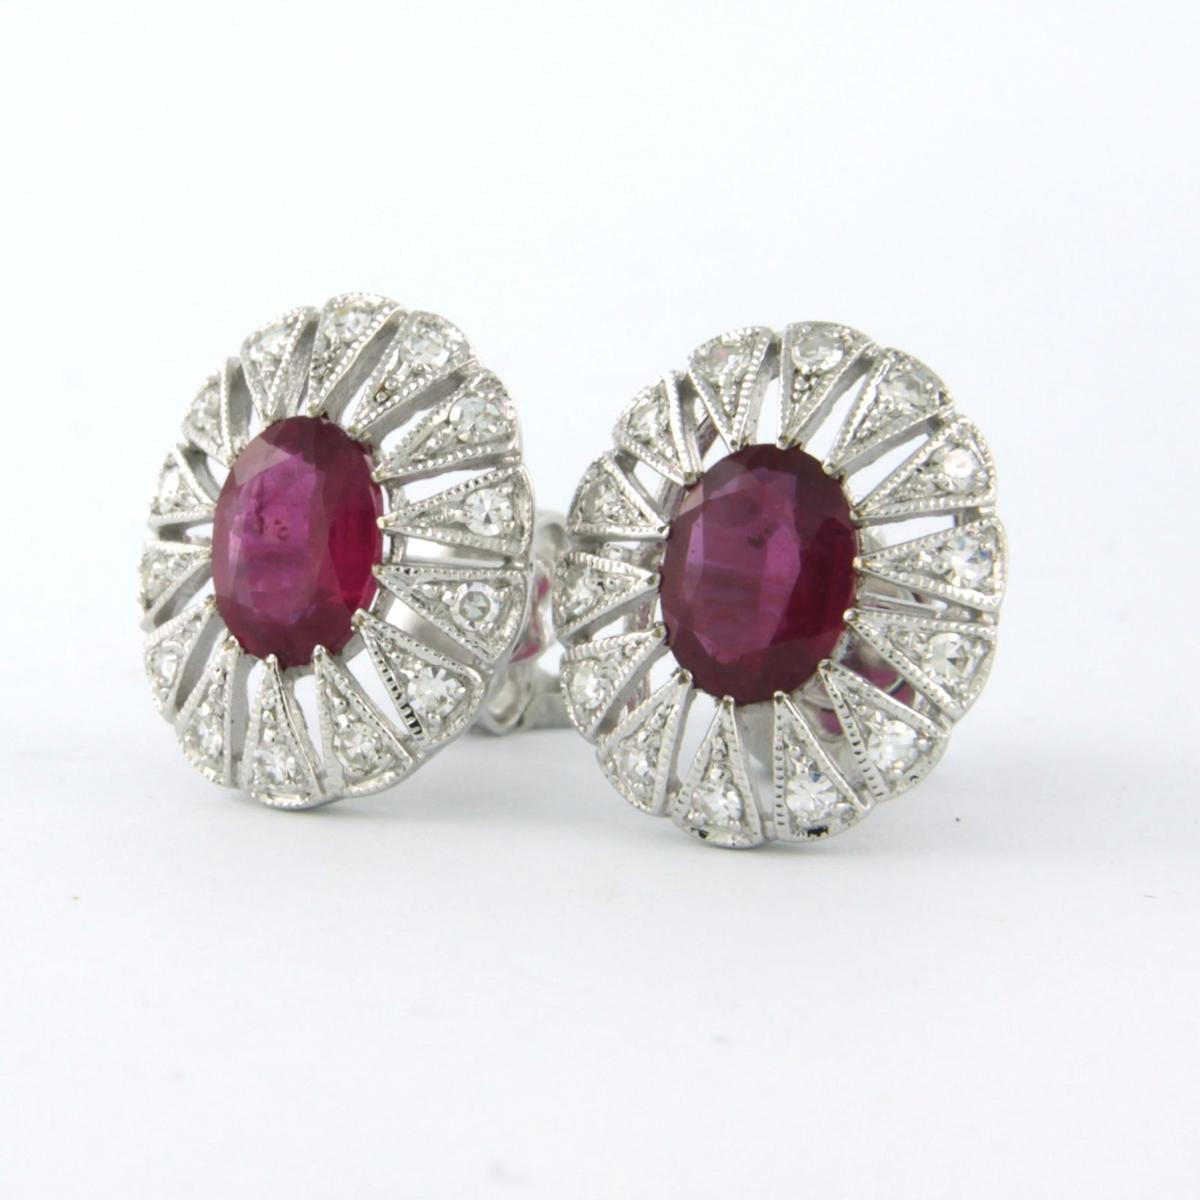 Women's 14 kt gold earrings set with ruby 2.90 carat and single cut diamond total 0.48ct For Sale